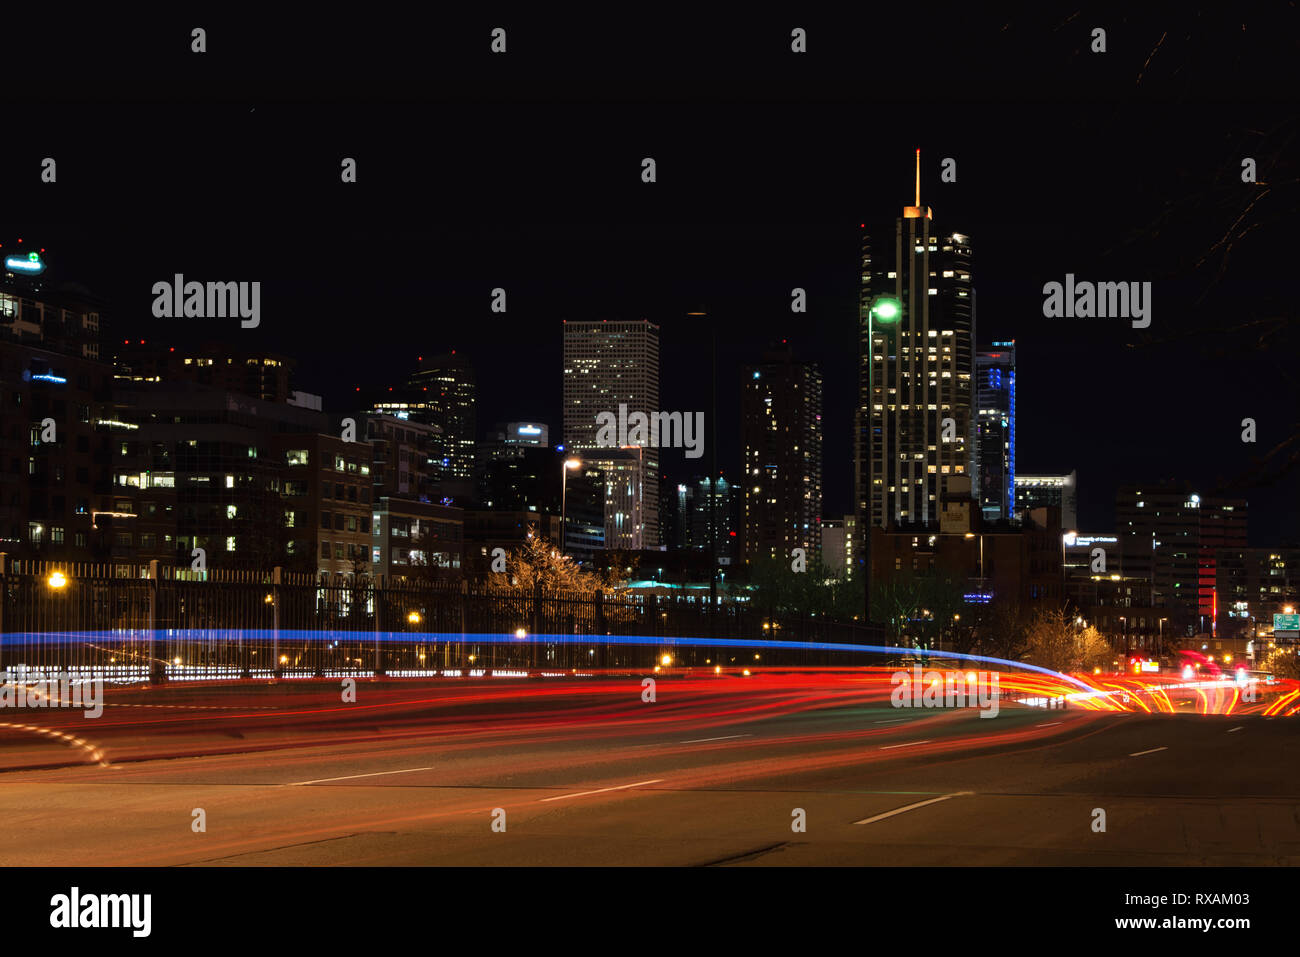 Beautiful downtown Denver skyline seen at night from Speer Blvd leading into town.  Exclusive image. Stock Photo